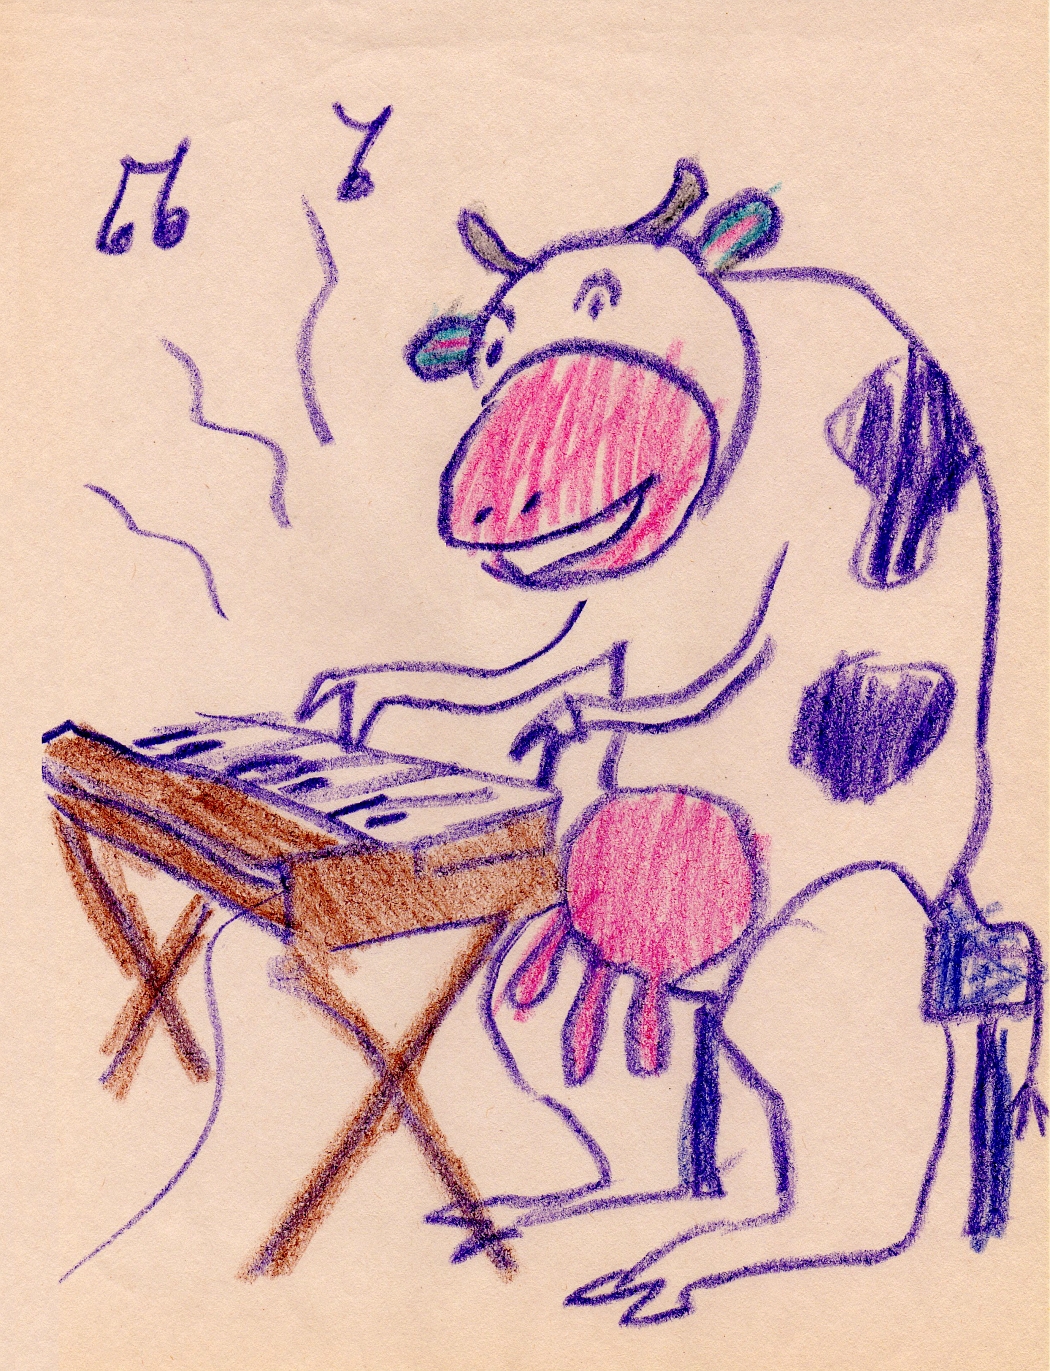 Cow Cow Boogie